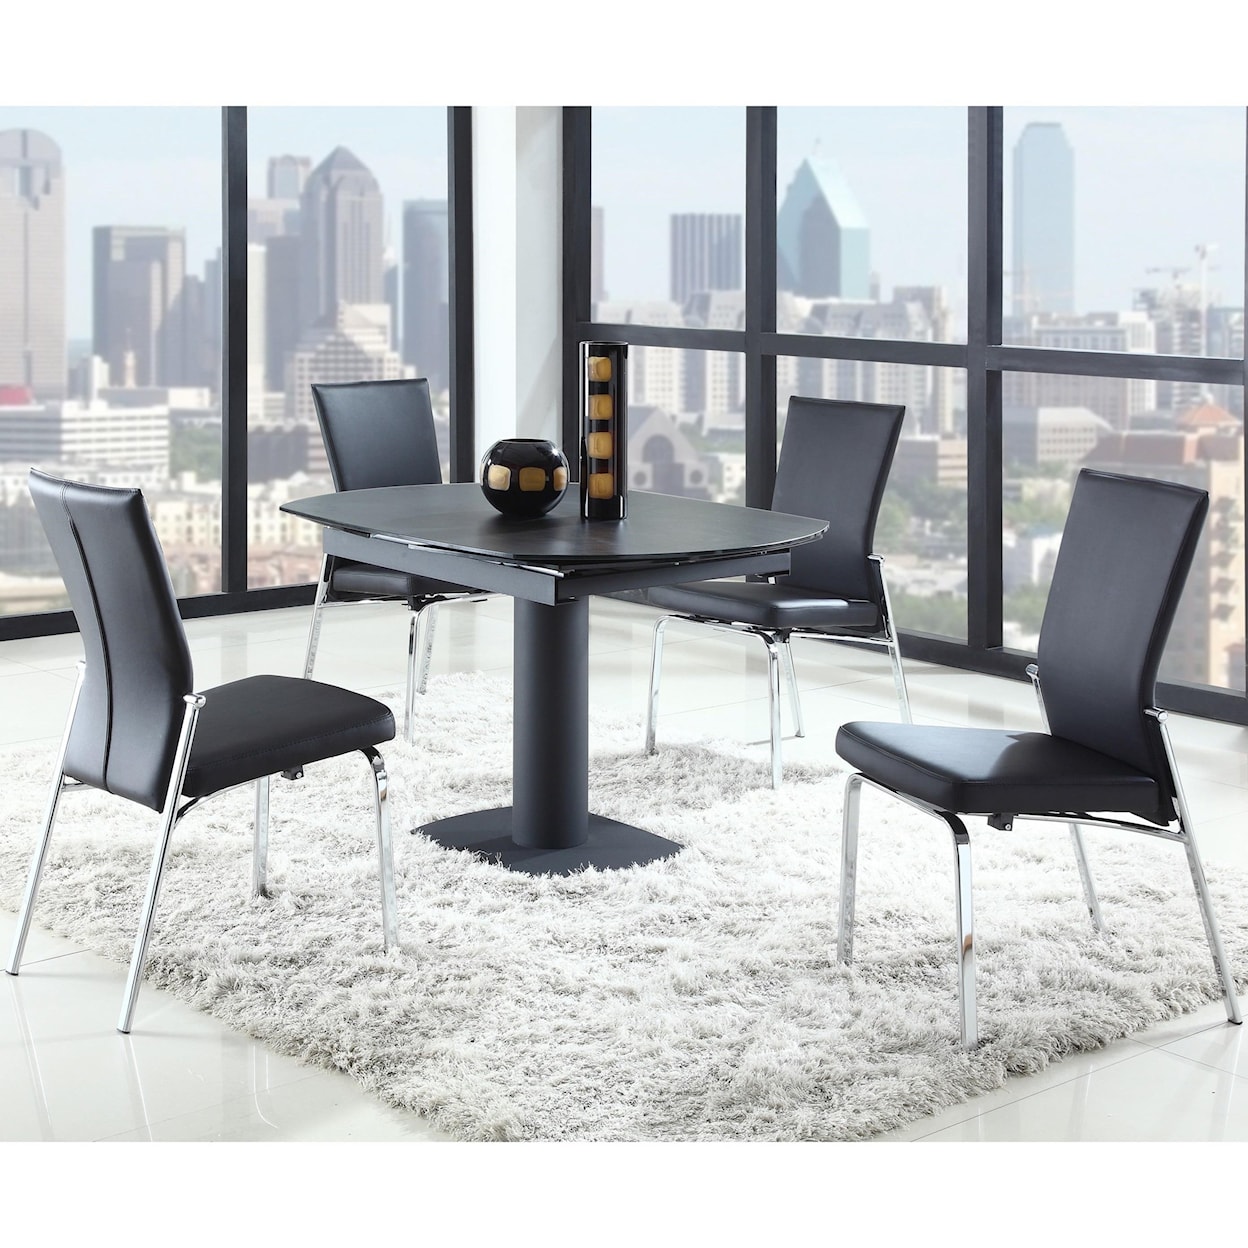 Chintaly Imports Grace 5 Piece Dining Set